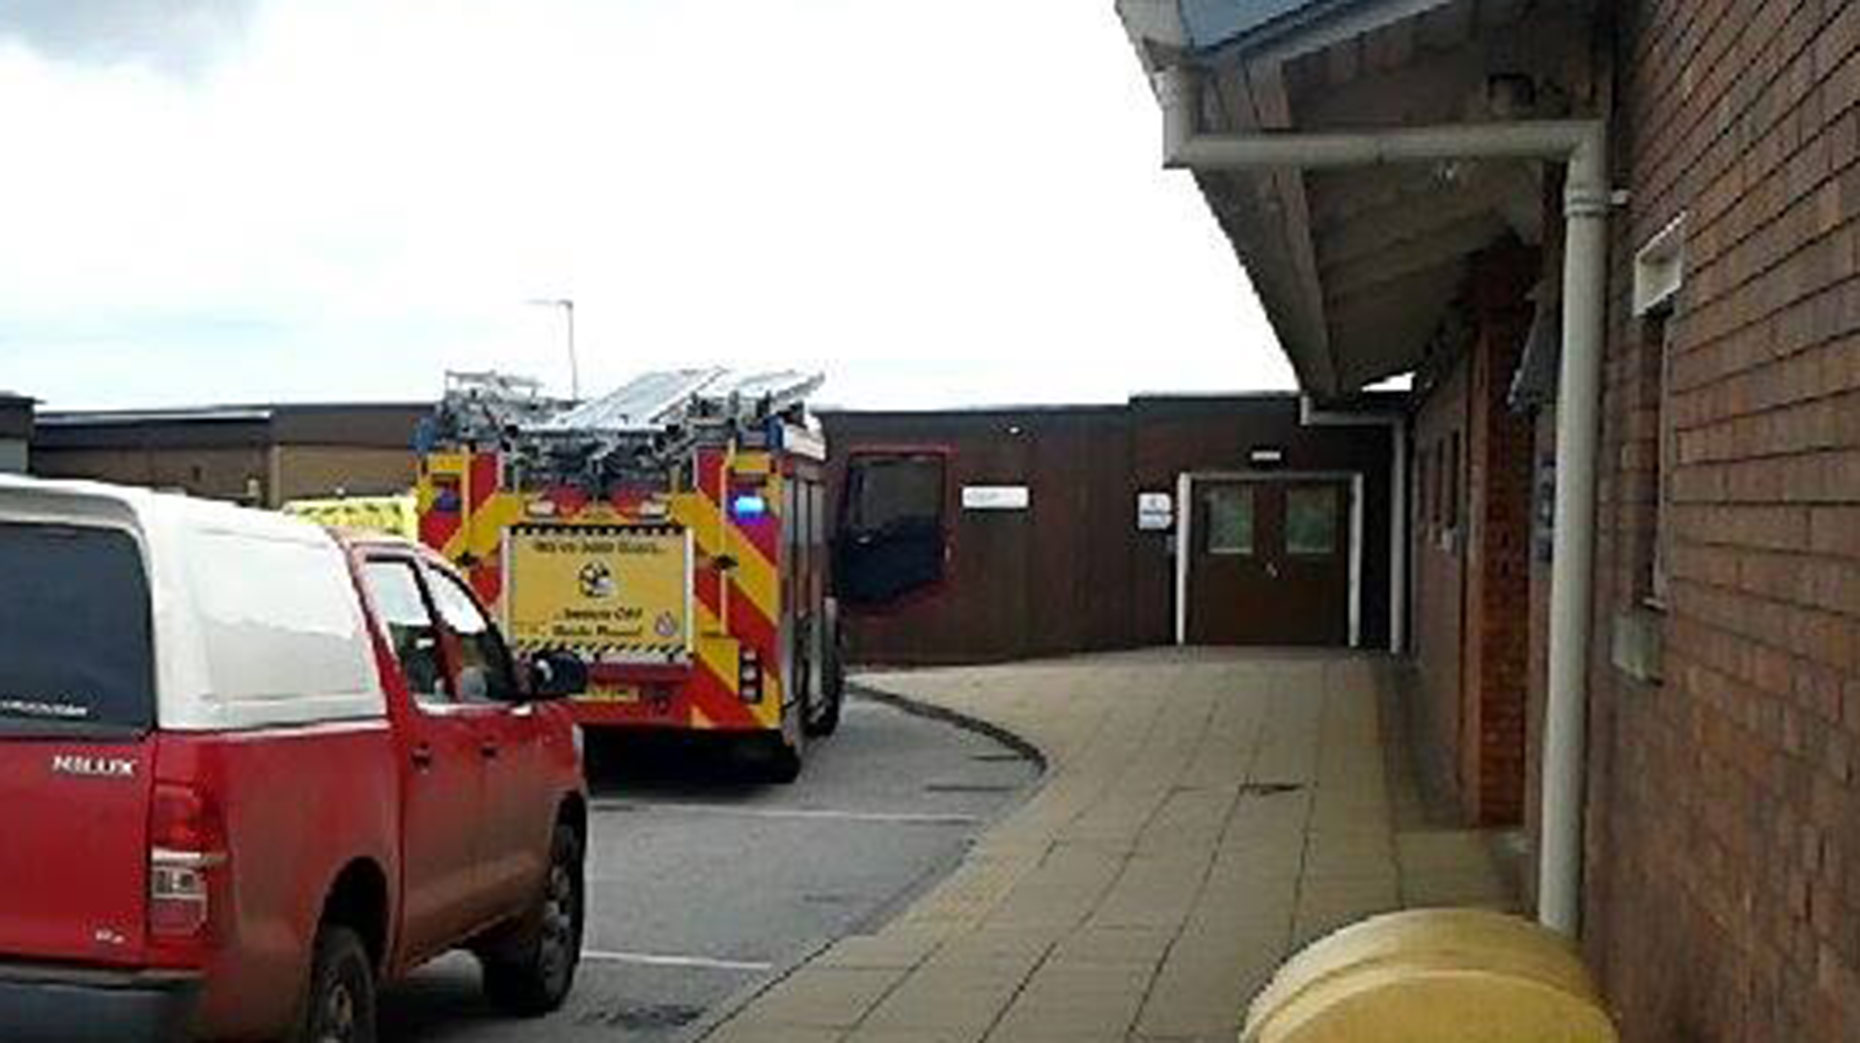 Patients were unable to enter the building. Photo: Ashley Hill